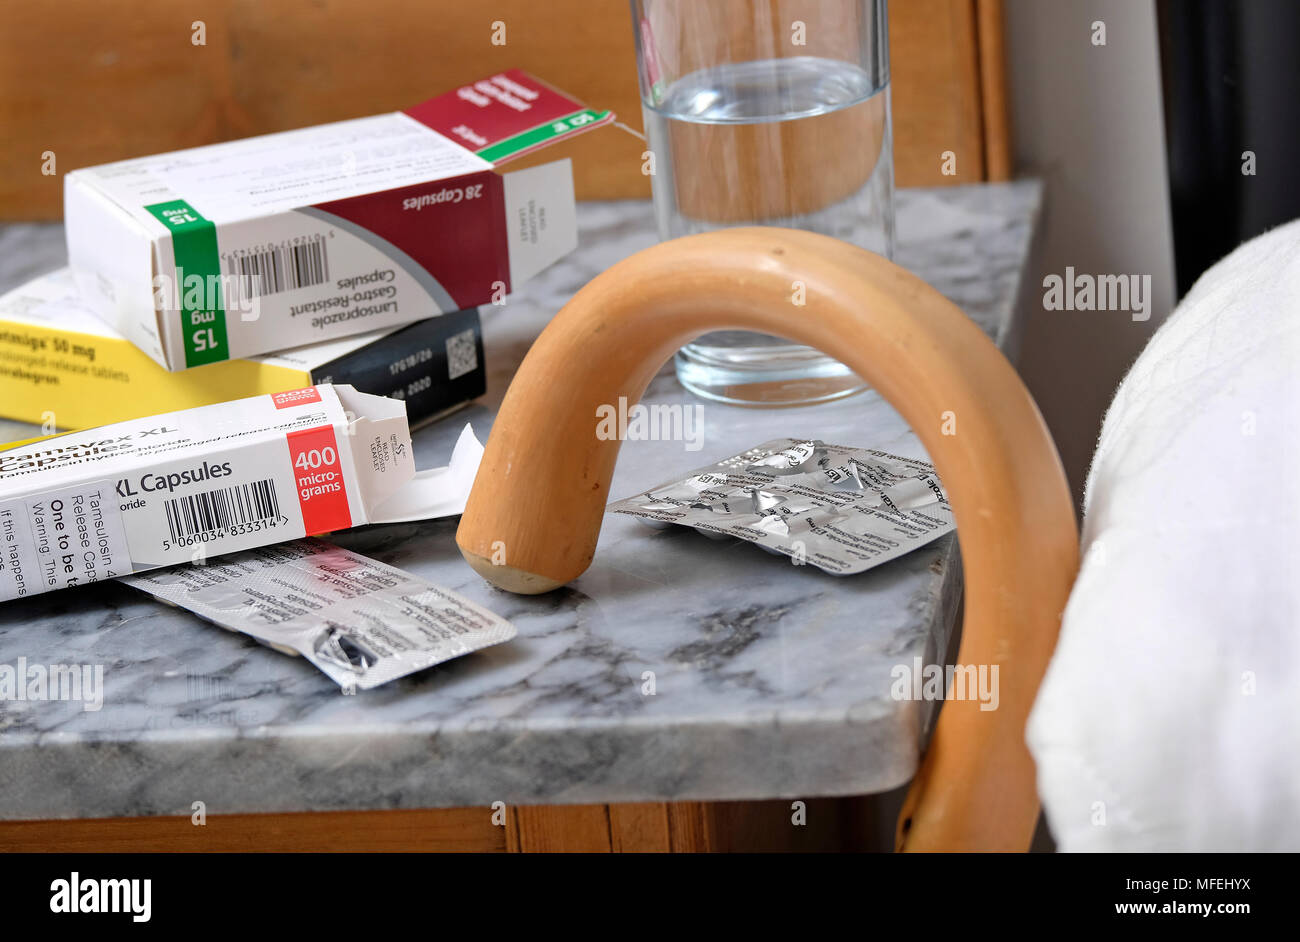 medication for elderly person Stock Photo